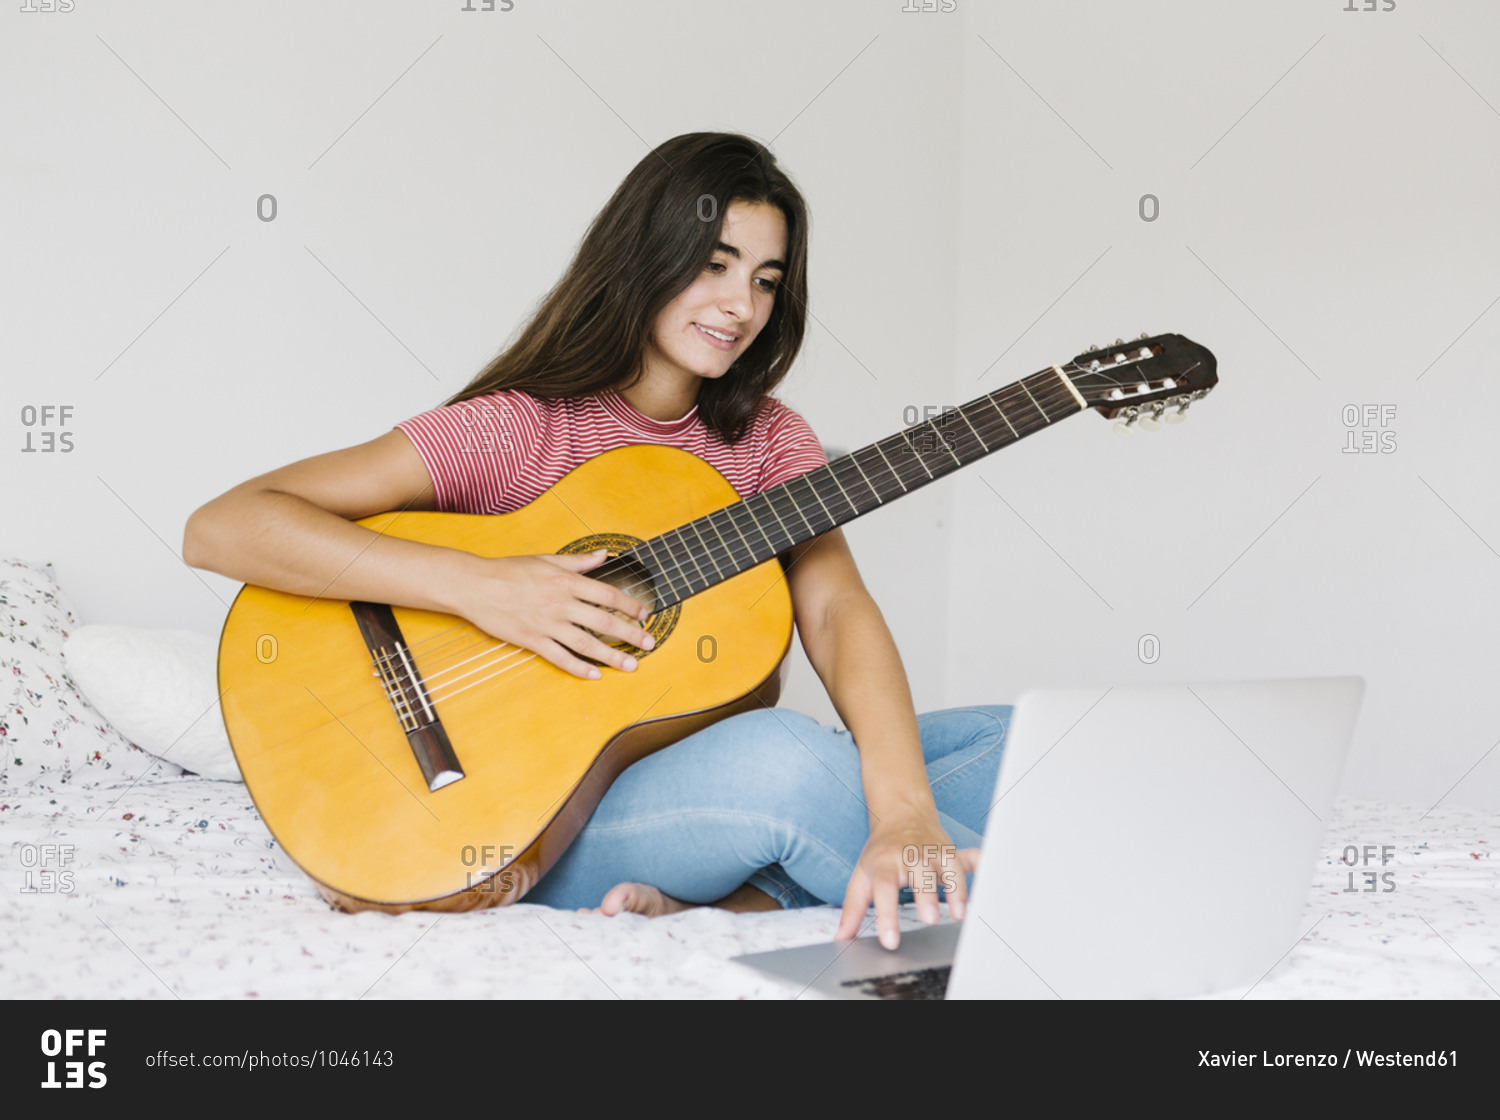 Woman learning guitar online at home in bedroom